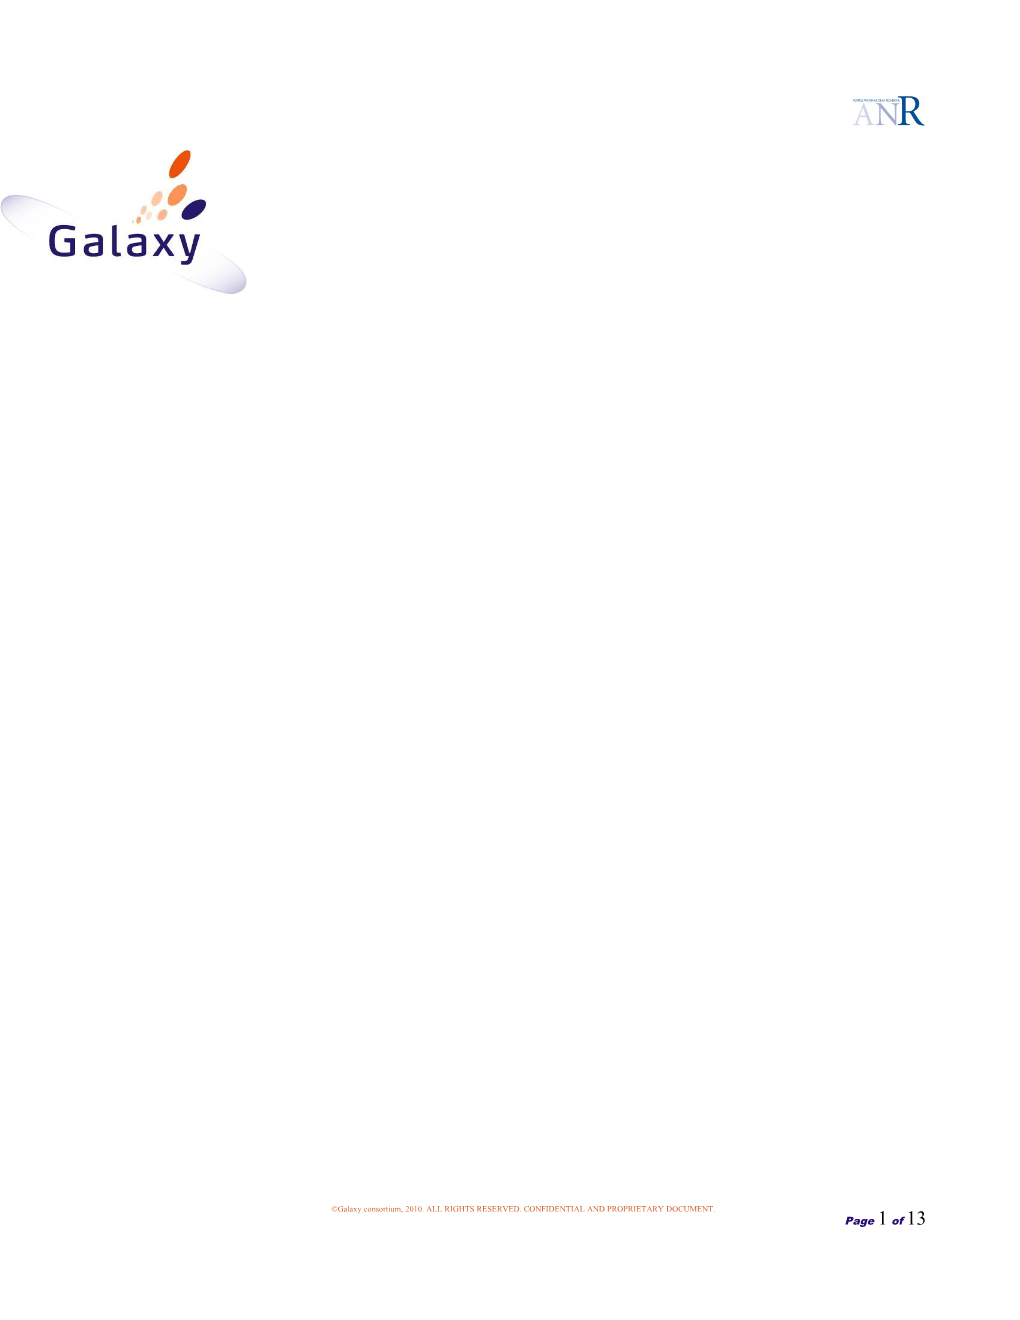 Galaxy Consortium, 2010. ALL RIGHTS RESERVED. CONFIDENTIAL and PROPRIETARY DOCUMENT